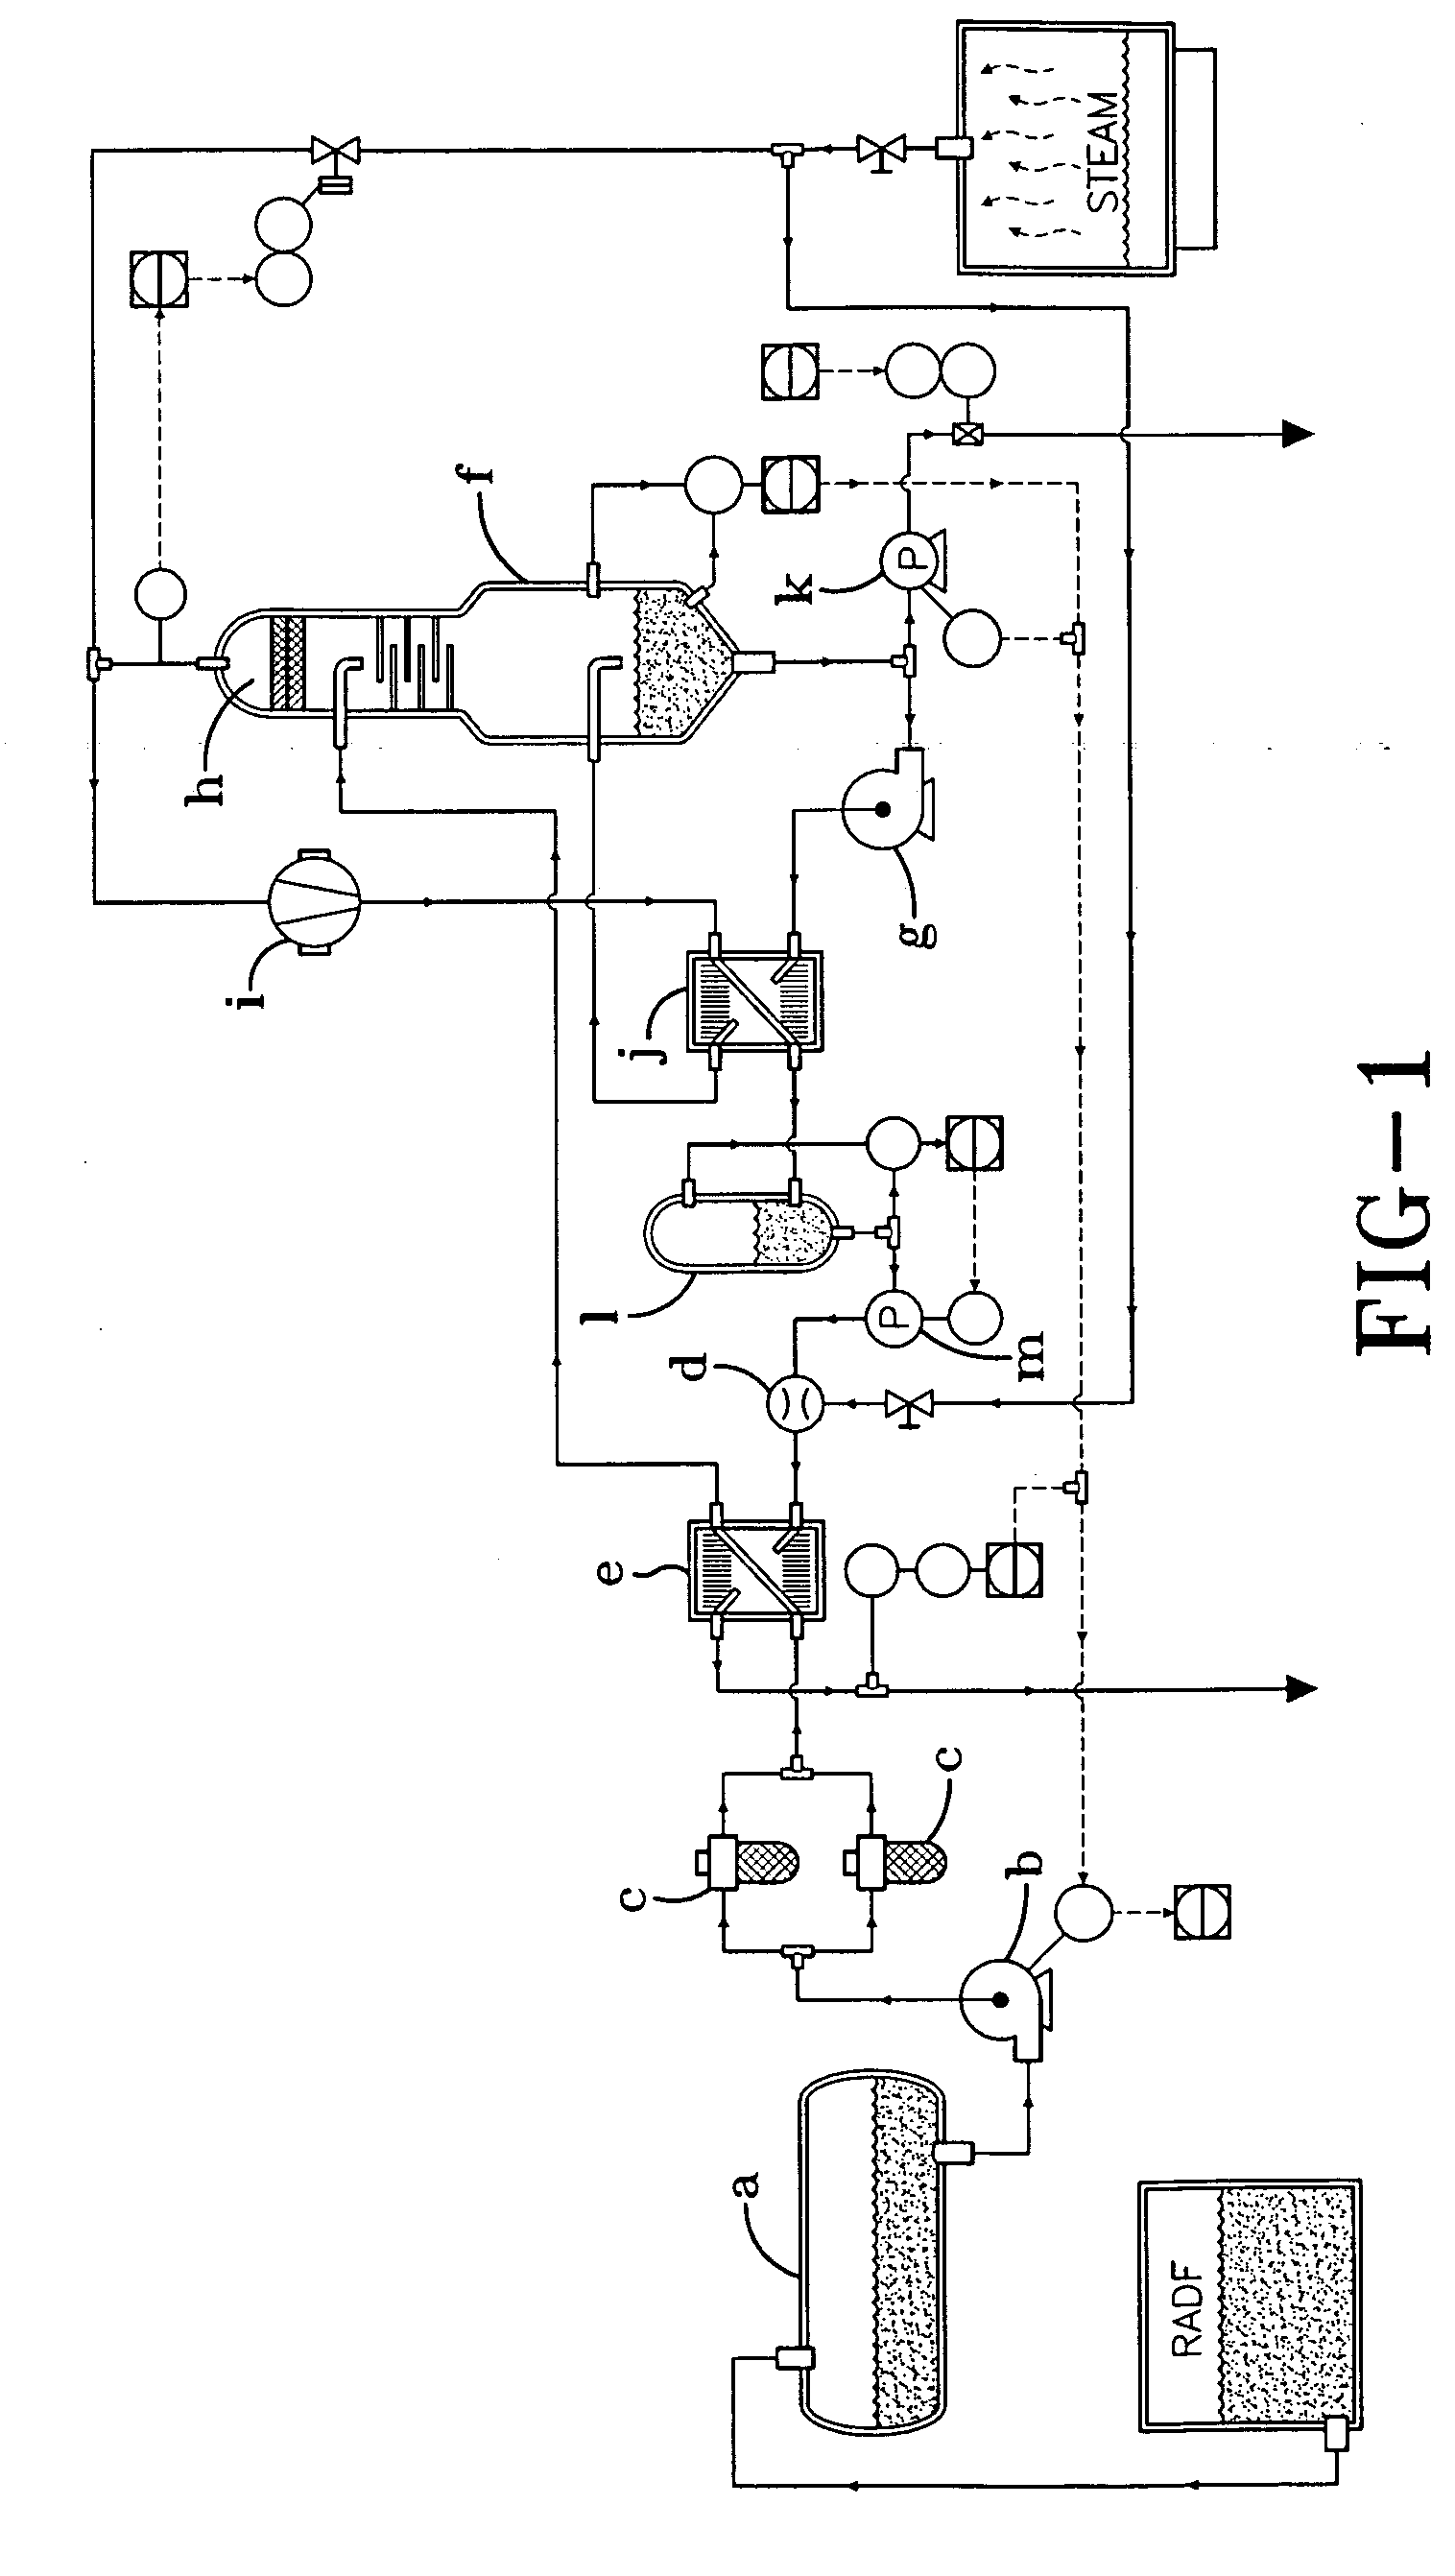 Method of cleaning and recycling glycol-tainted water from de-icing operations at airports